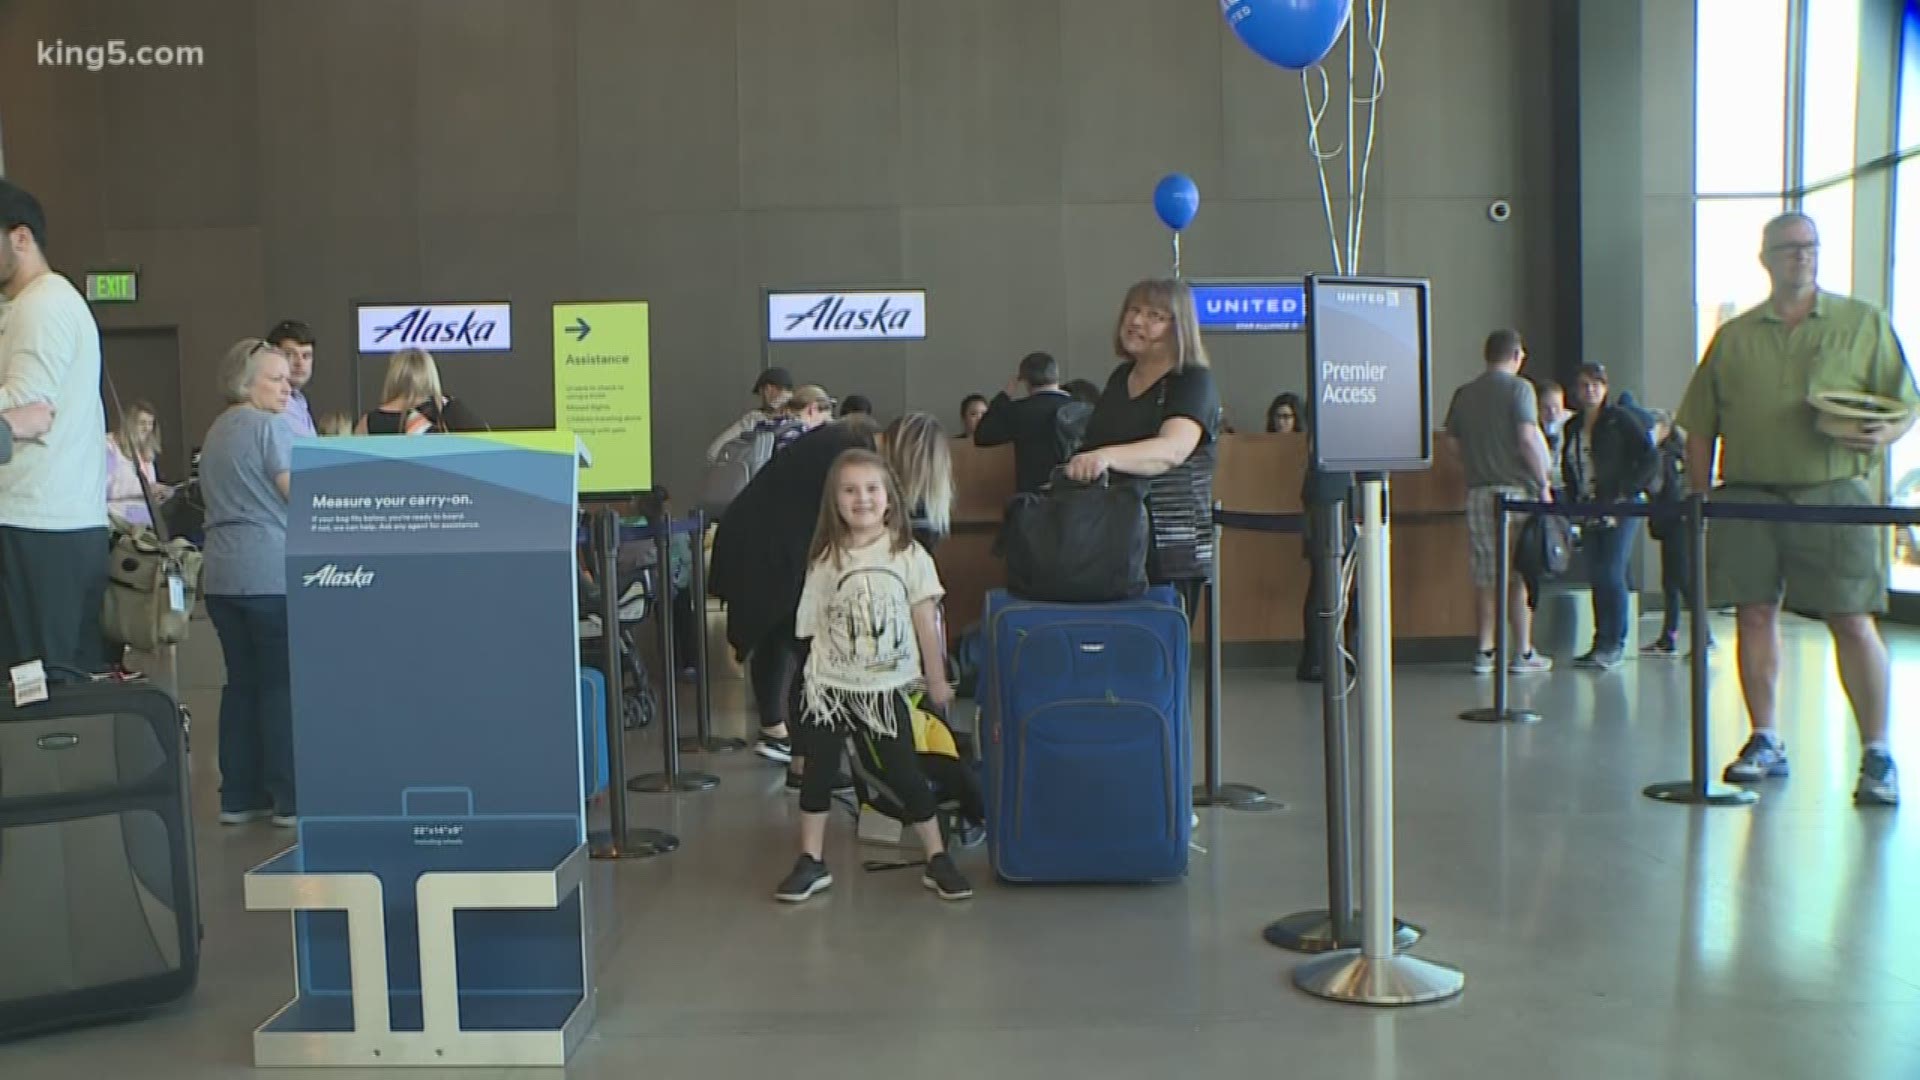 A string quartet welcomed passengers on March 31, the start of United's commercial service out of Paine Field.